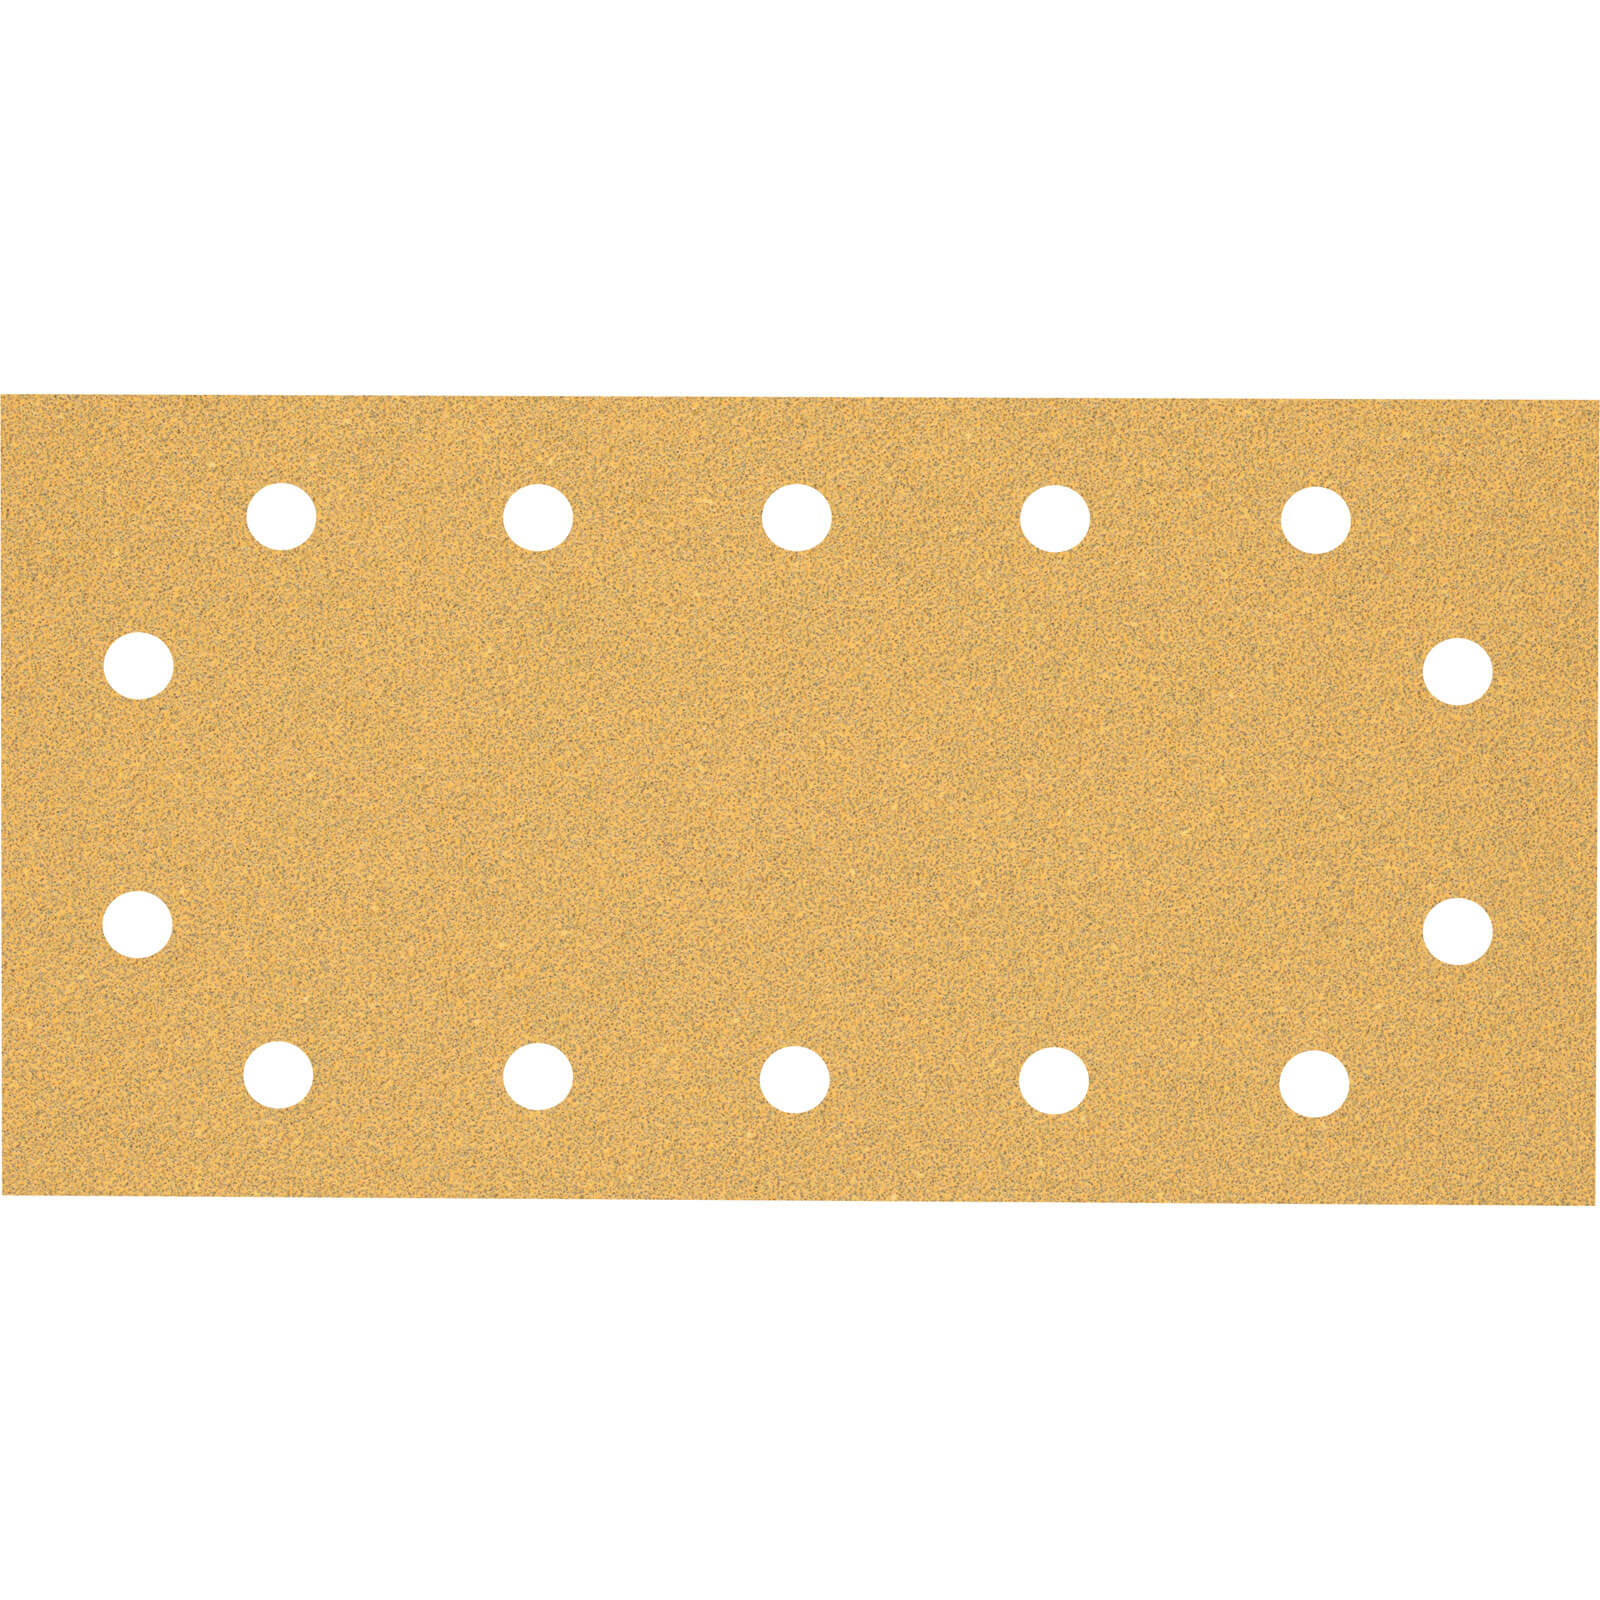 Image of Bosch Expert C470 Punched Hook and Loop 1/2 Sanding Sheets 115mm x 230mm 60g Pack of 10